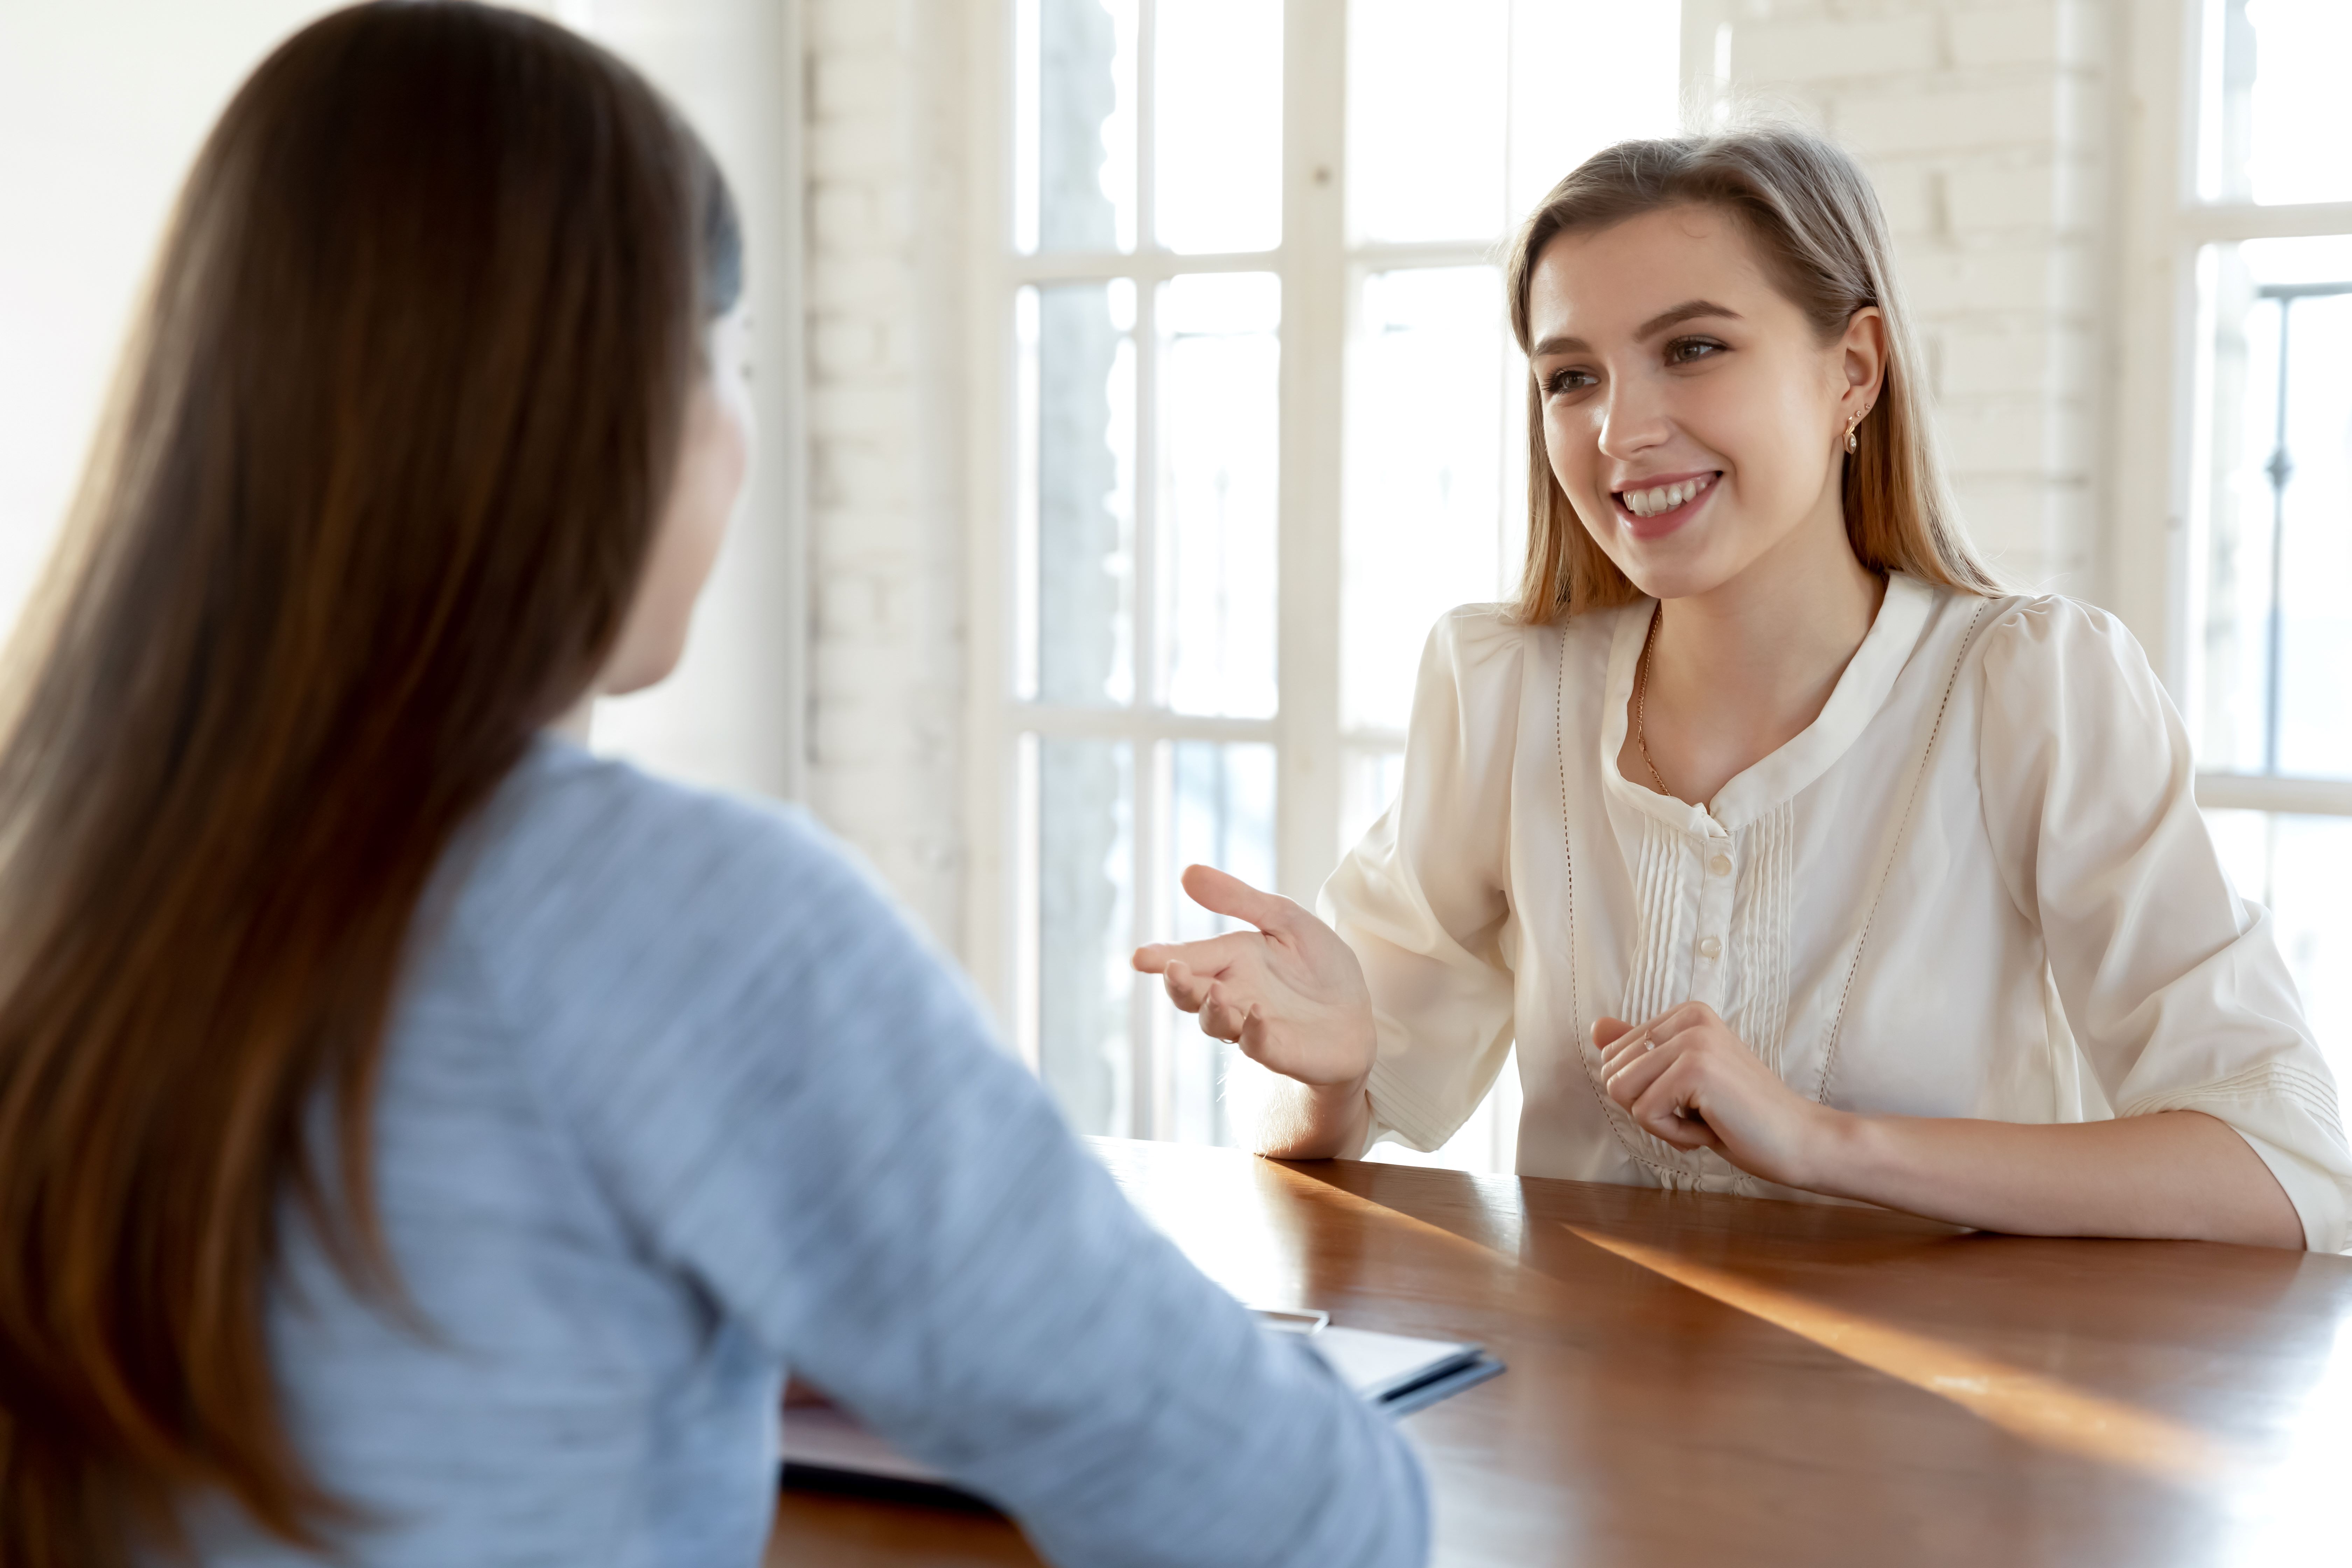 Effective communication skills for interviews